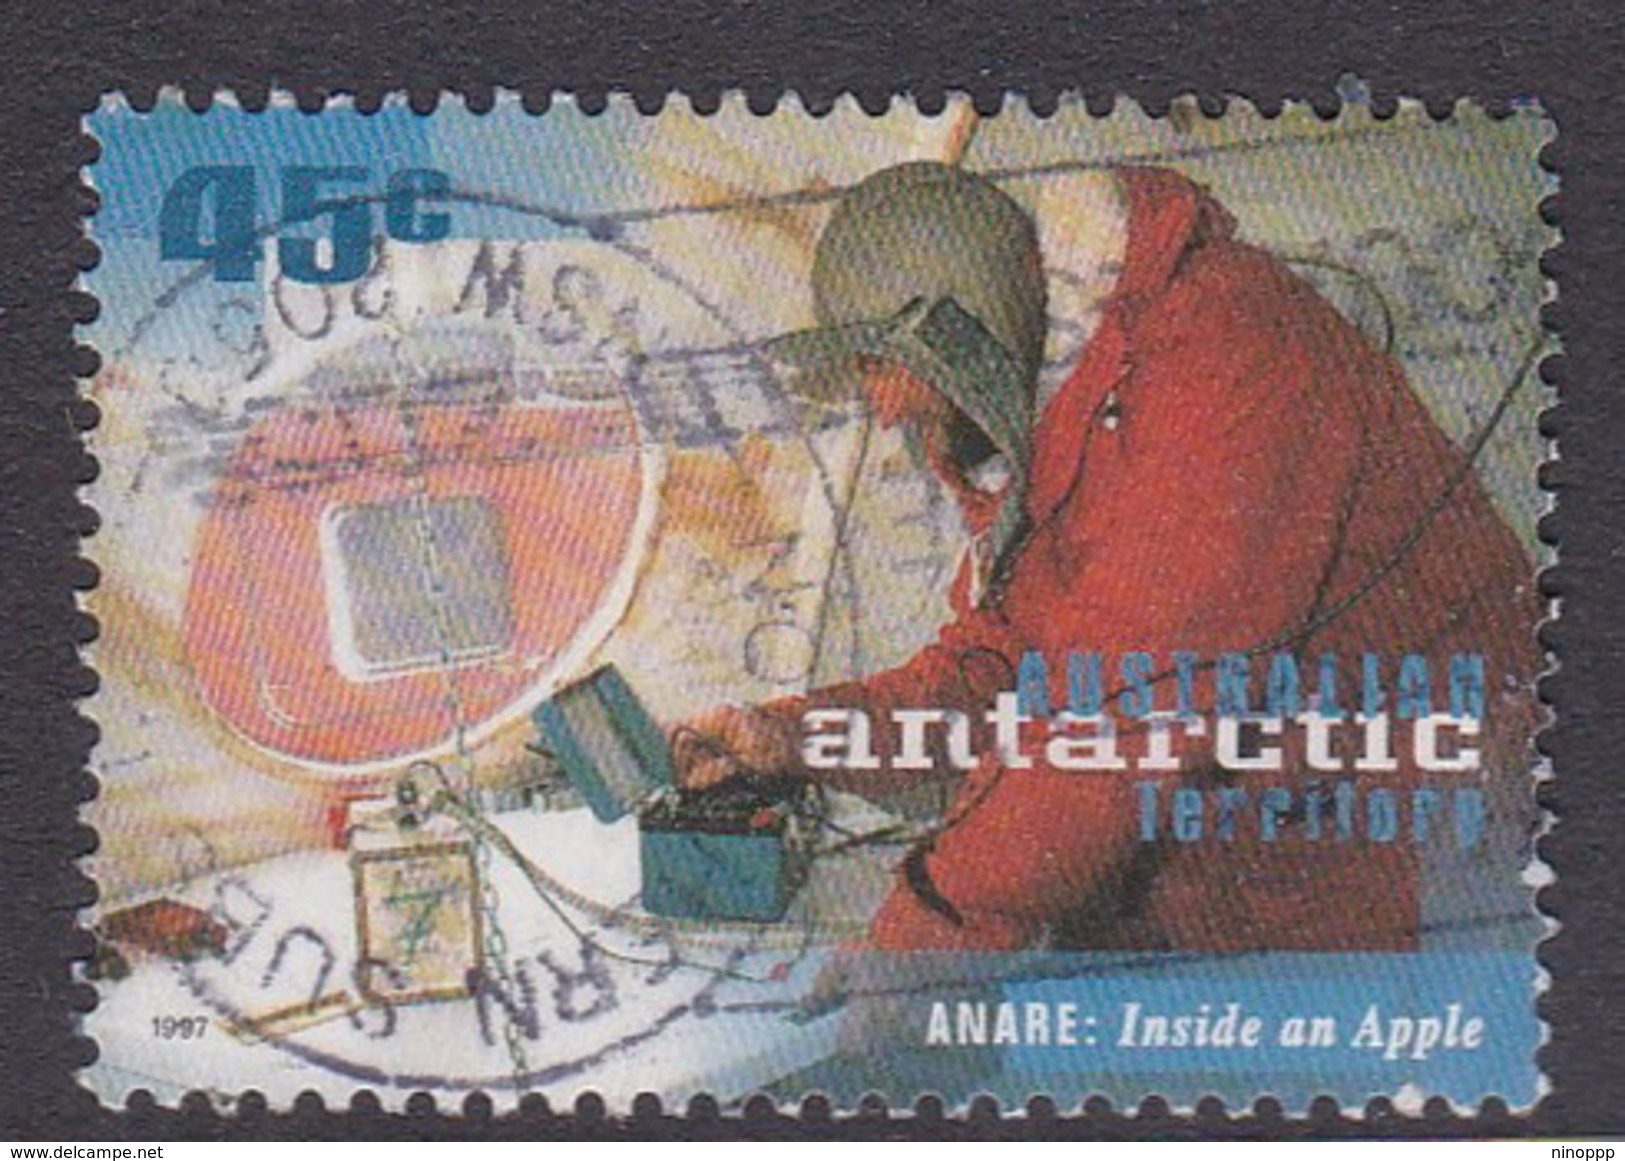 Australian Antarctic Territory  S 111 1997 50th Anniversary Of ANARE 45c Inside An Apple Used - Used Stamps